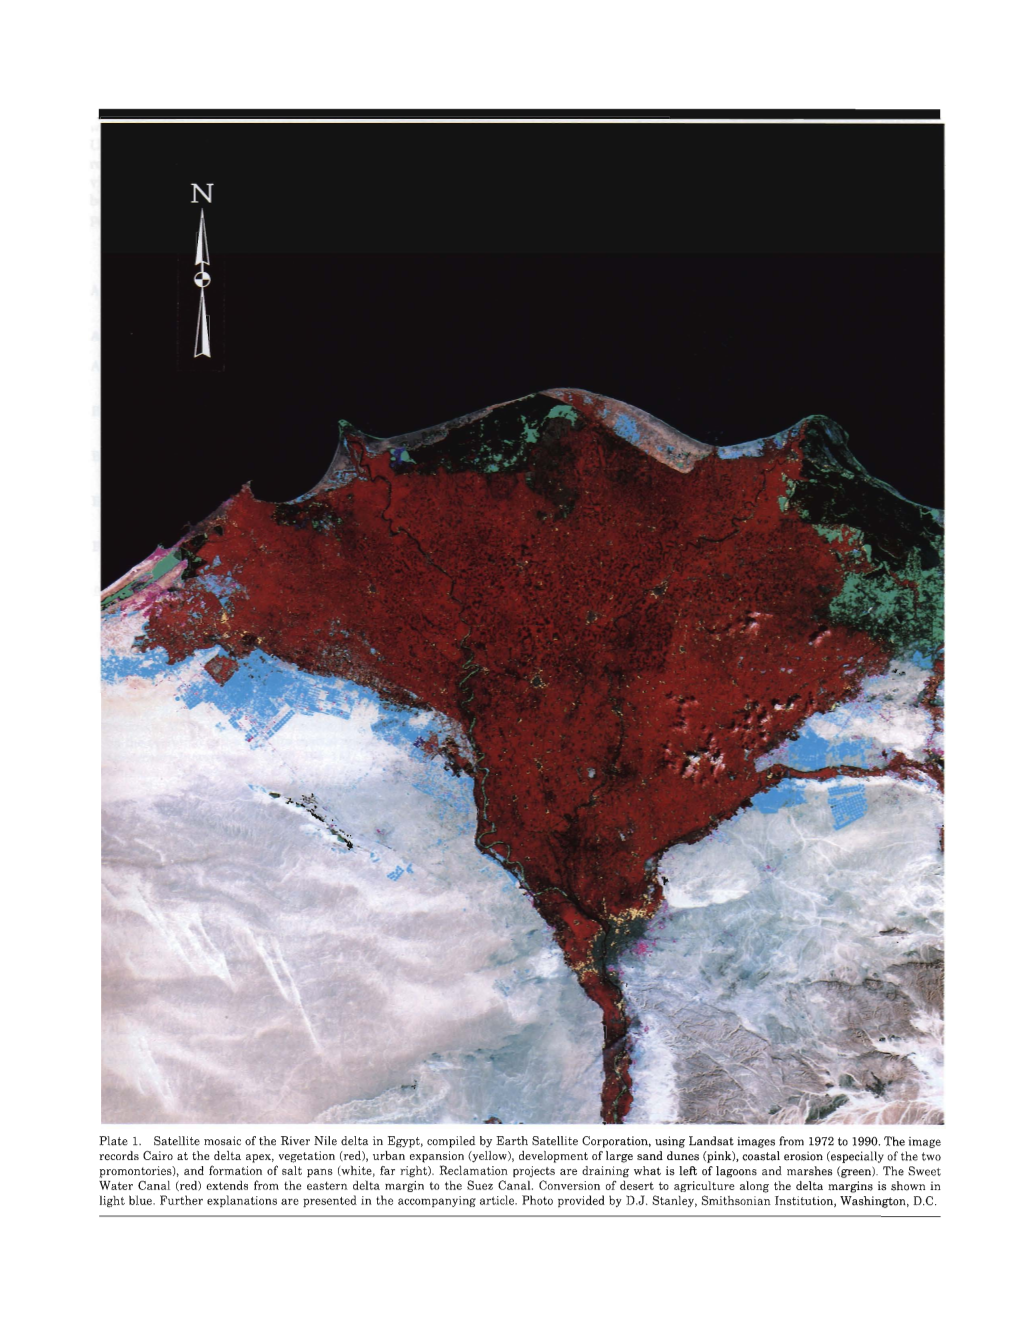 Plate 1. Satellite Mosaic of the River Nile Delta in Egypt, Compiled by Earth Satellite Corporation, Using Landsat Images from 1972 to 1990